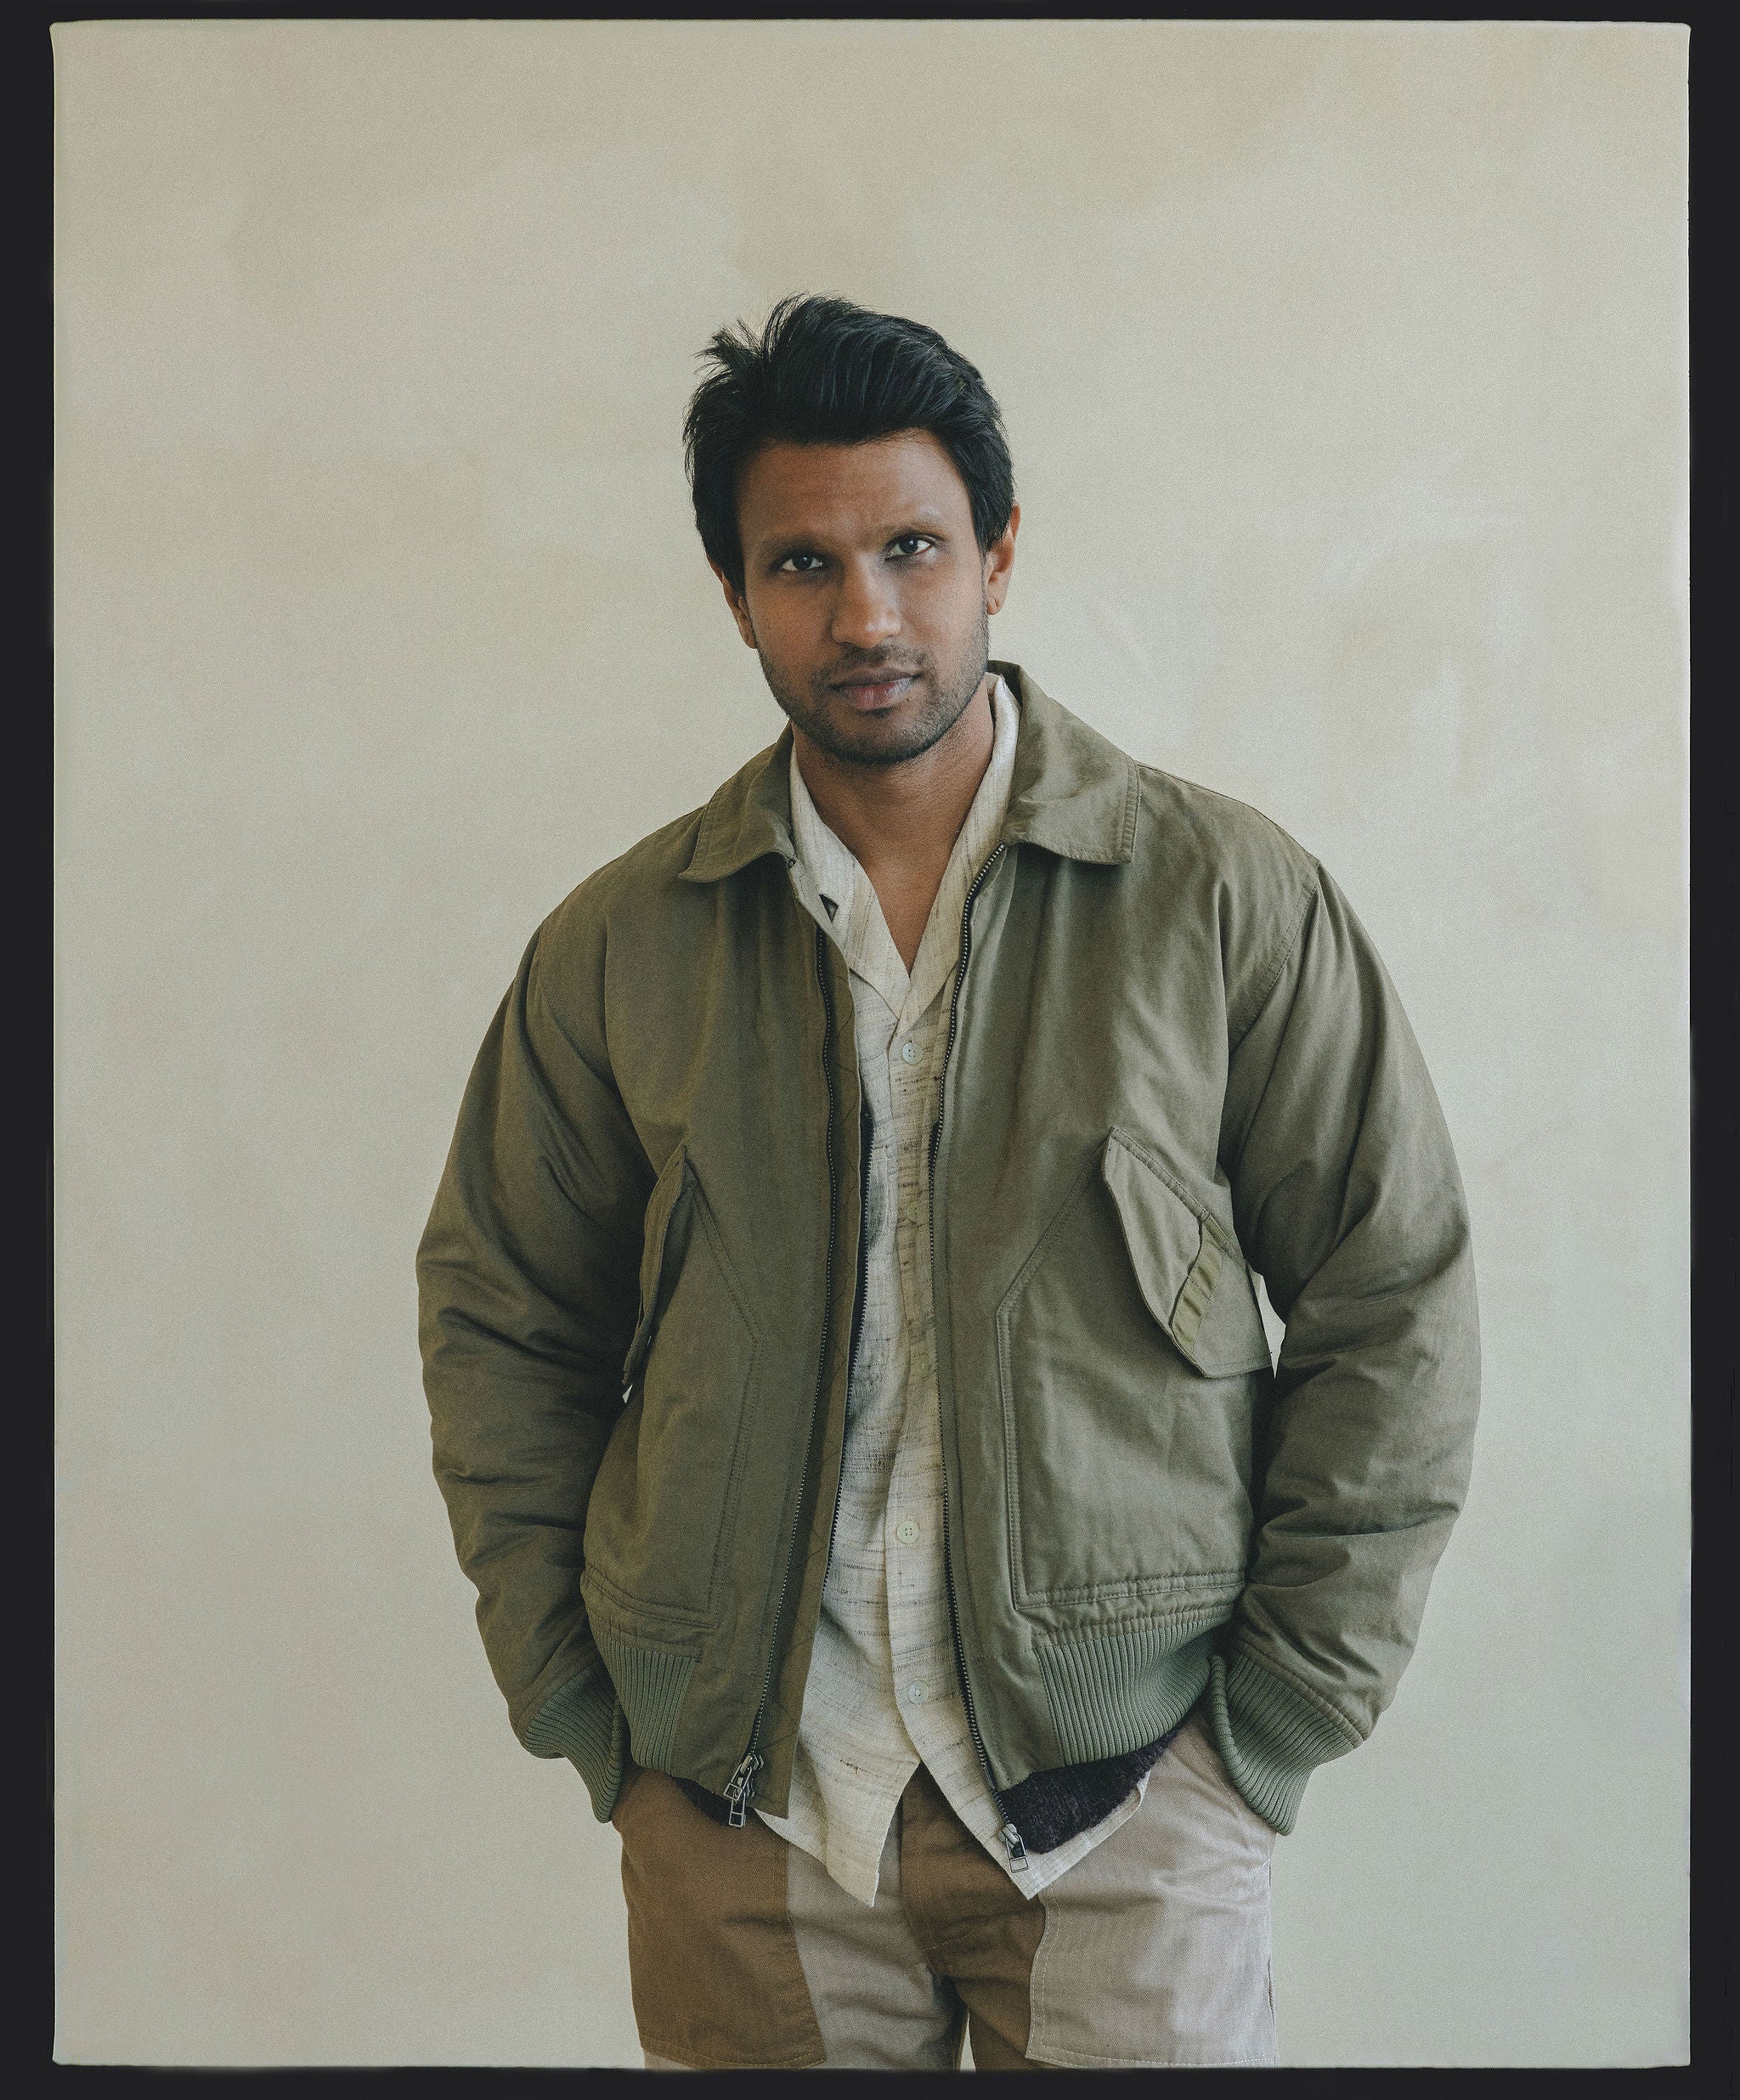 A man in an olive bomber jacket over a cream shirt looks into the camera.